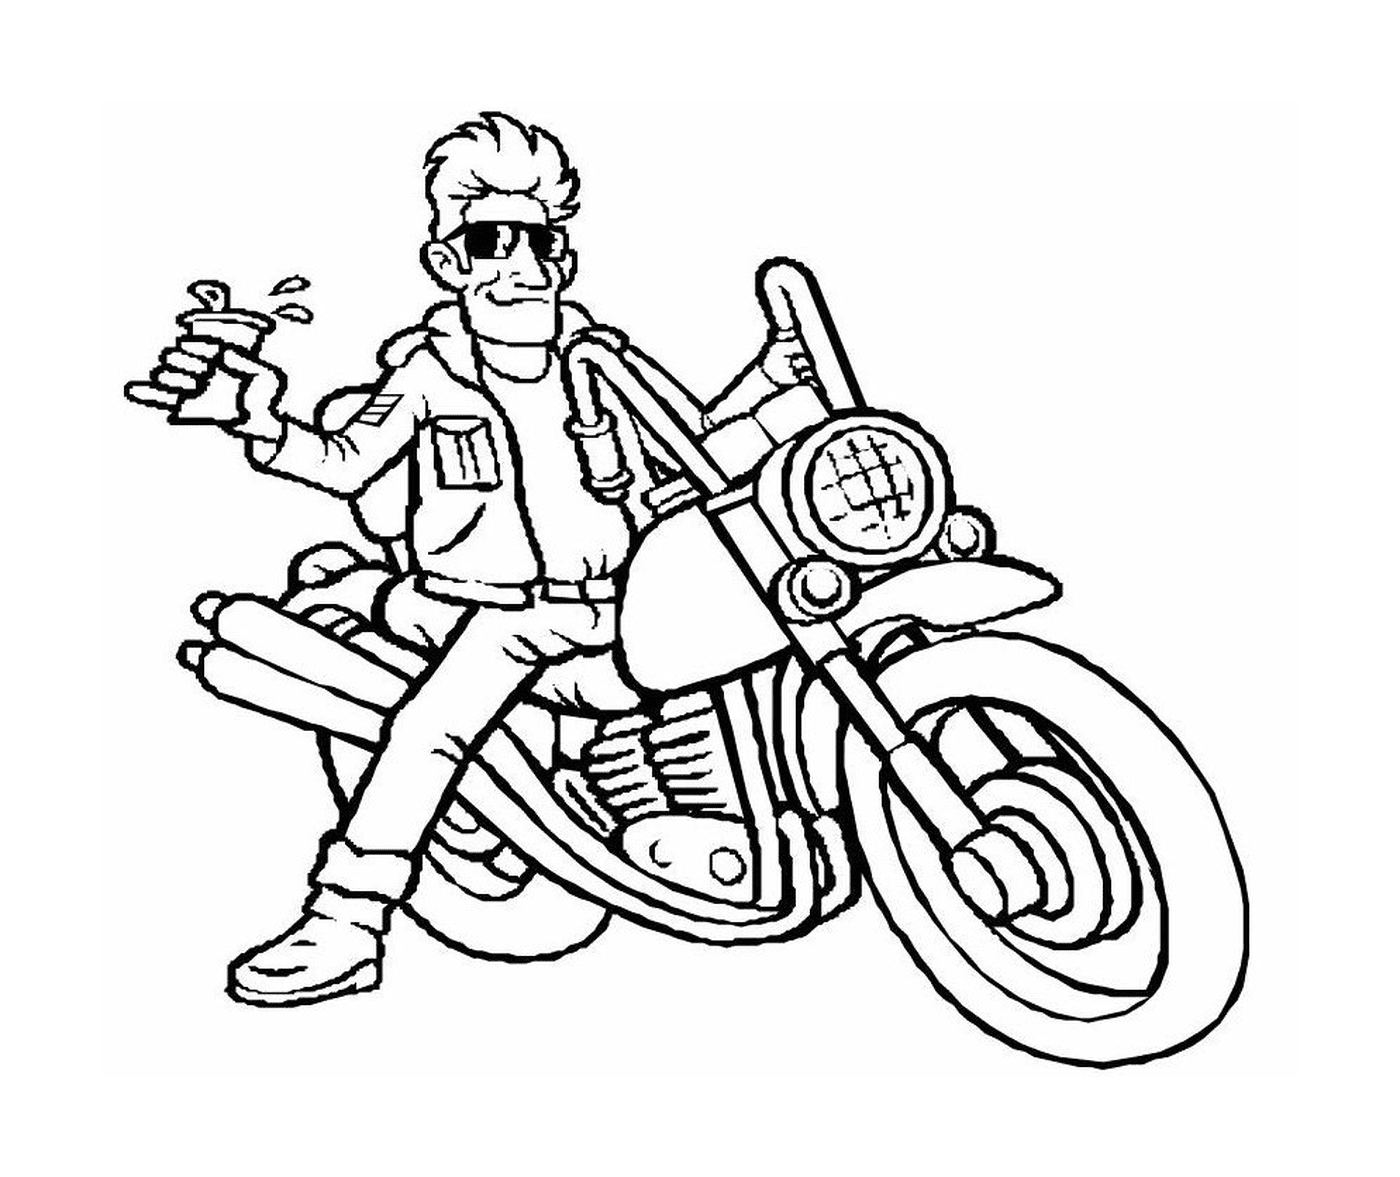  Man sitting in the back of a motorcycle 